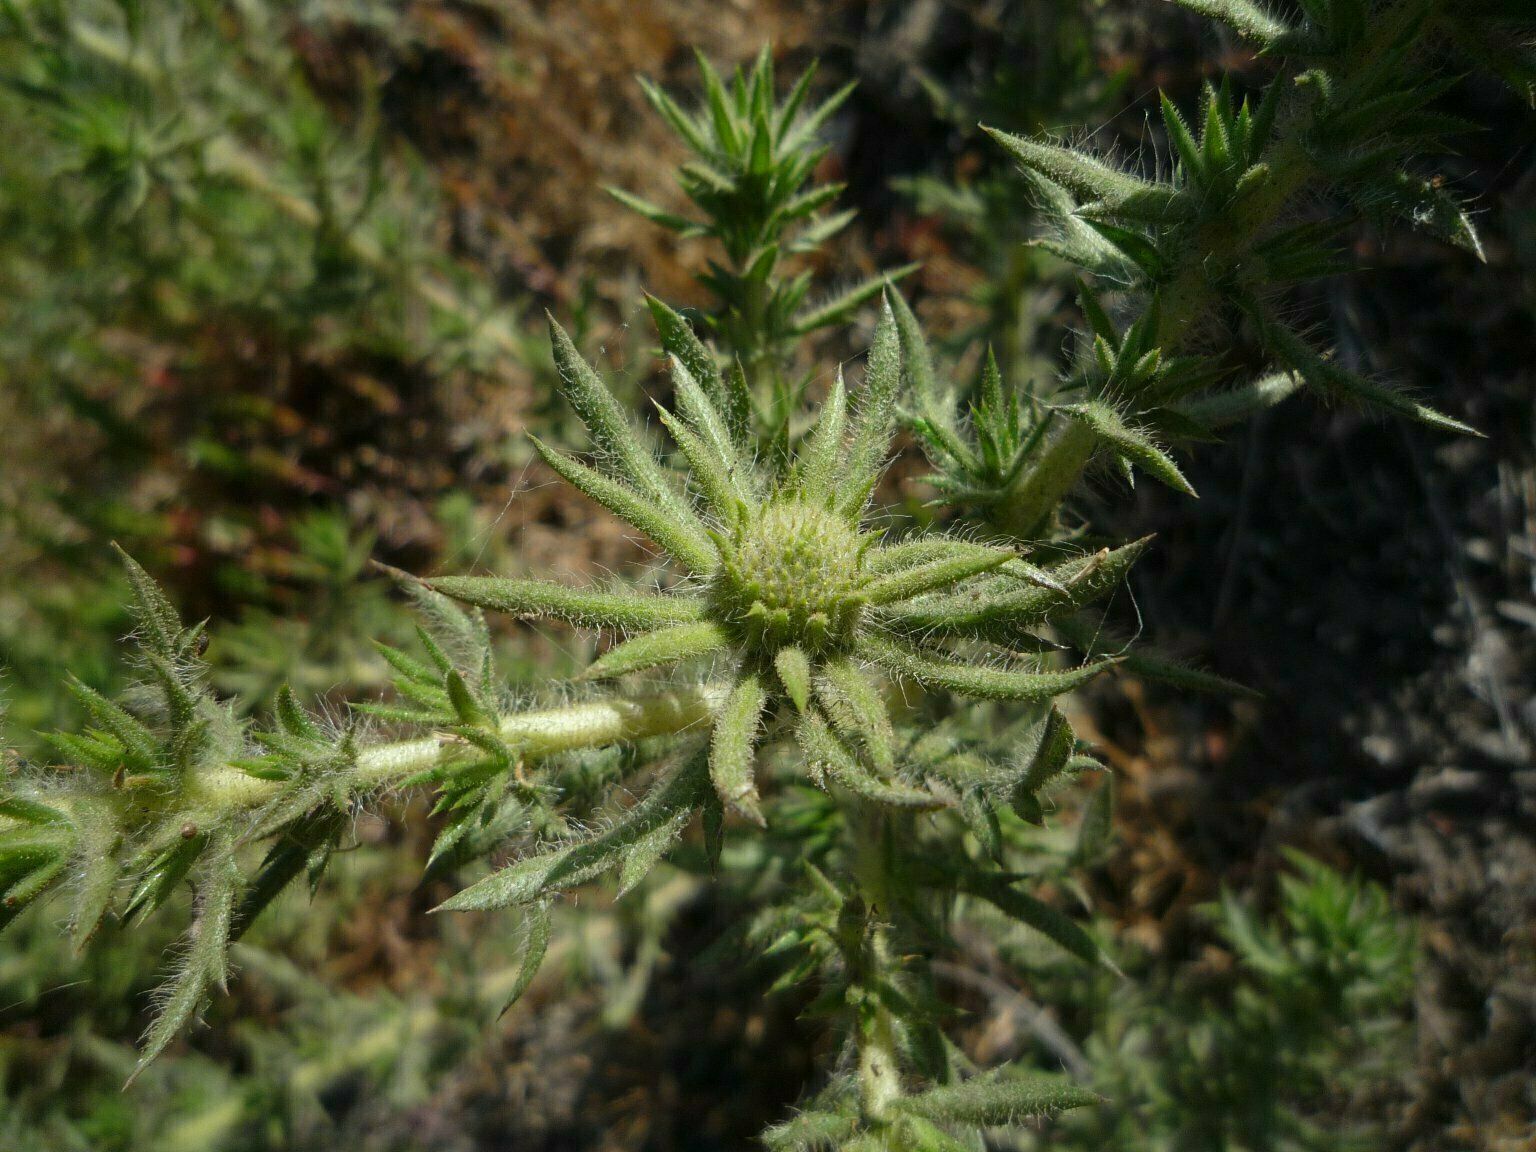 High Resolution Centromadia parryi Bud